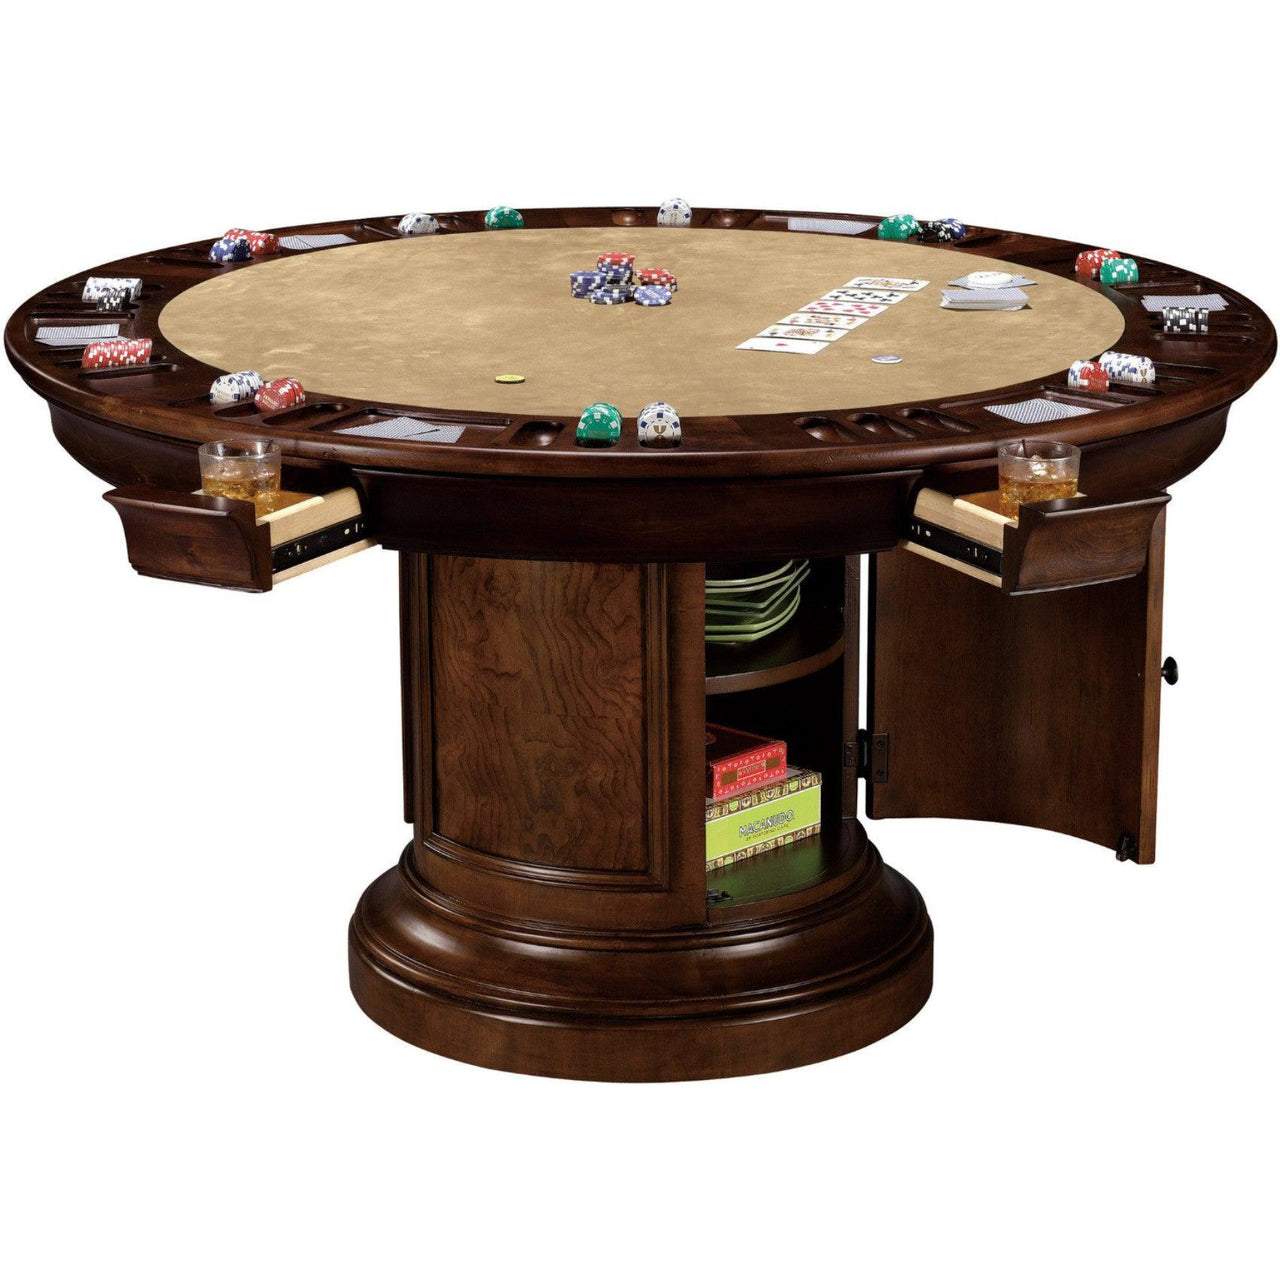 Howard Miller Ithaca poker and dining table, convertible-AMERICANA-POKER-TABLES